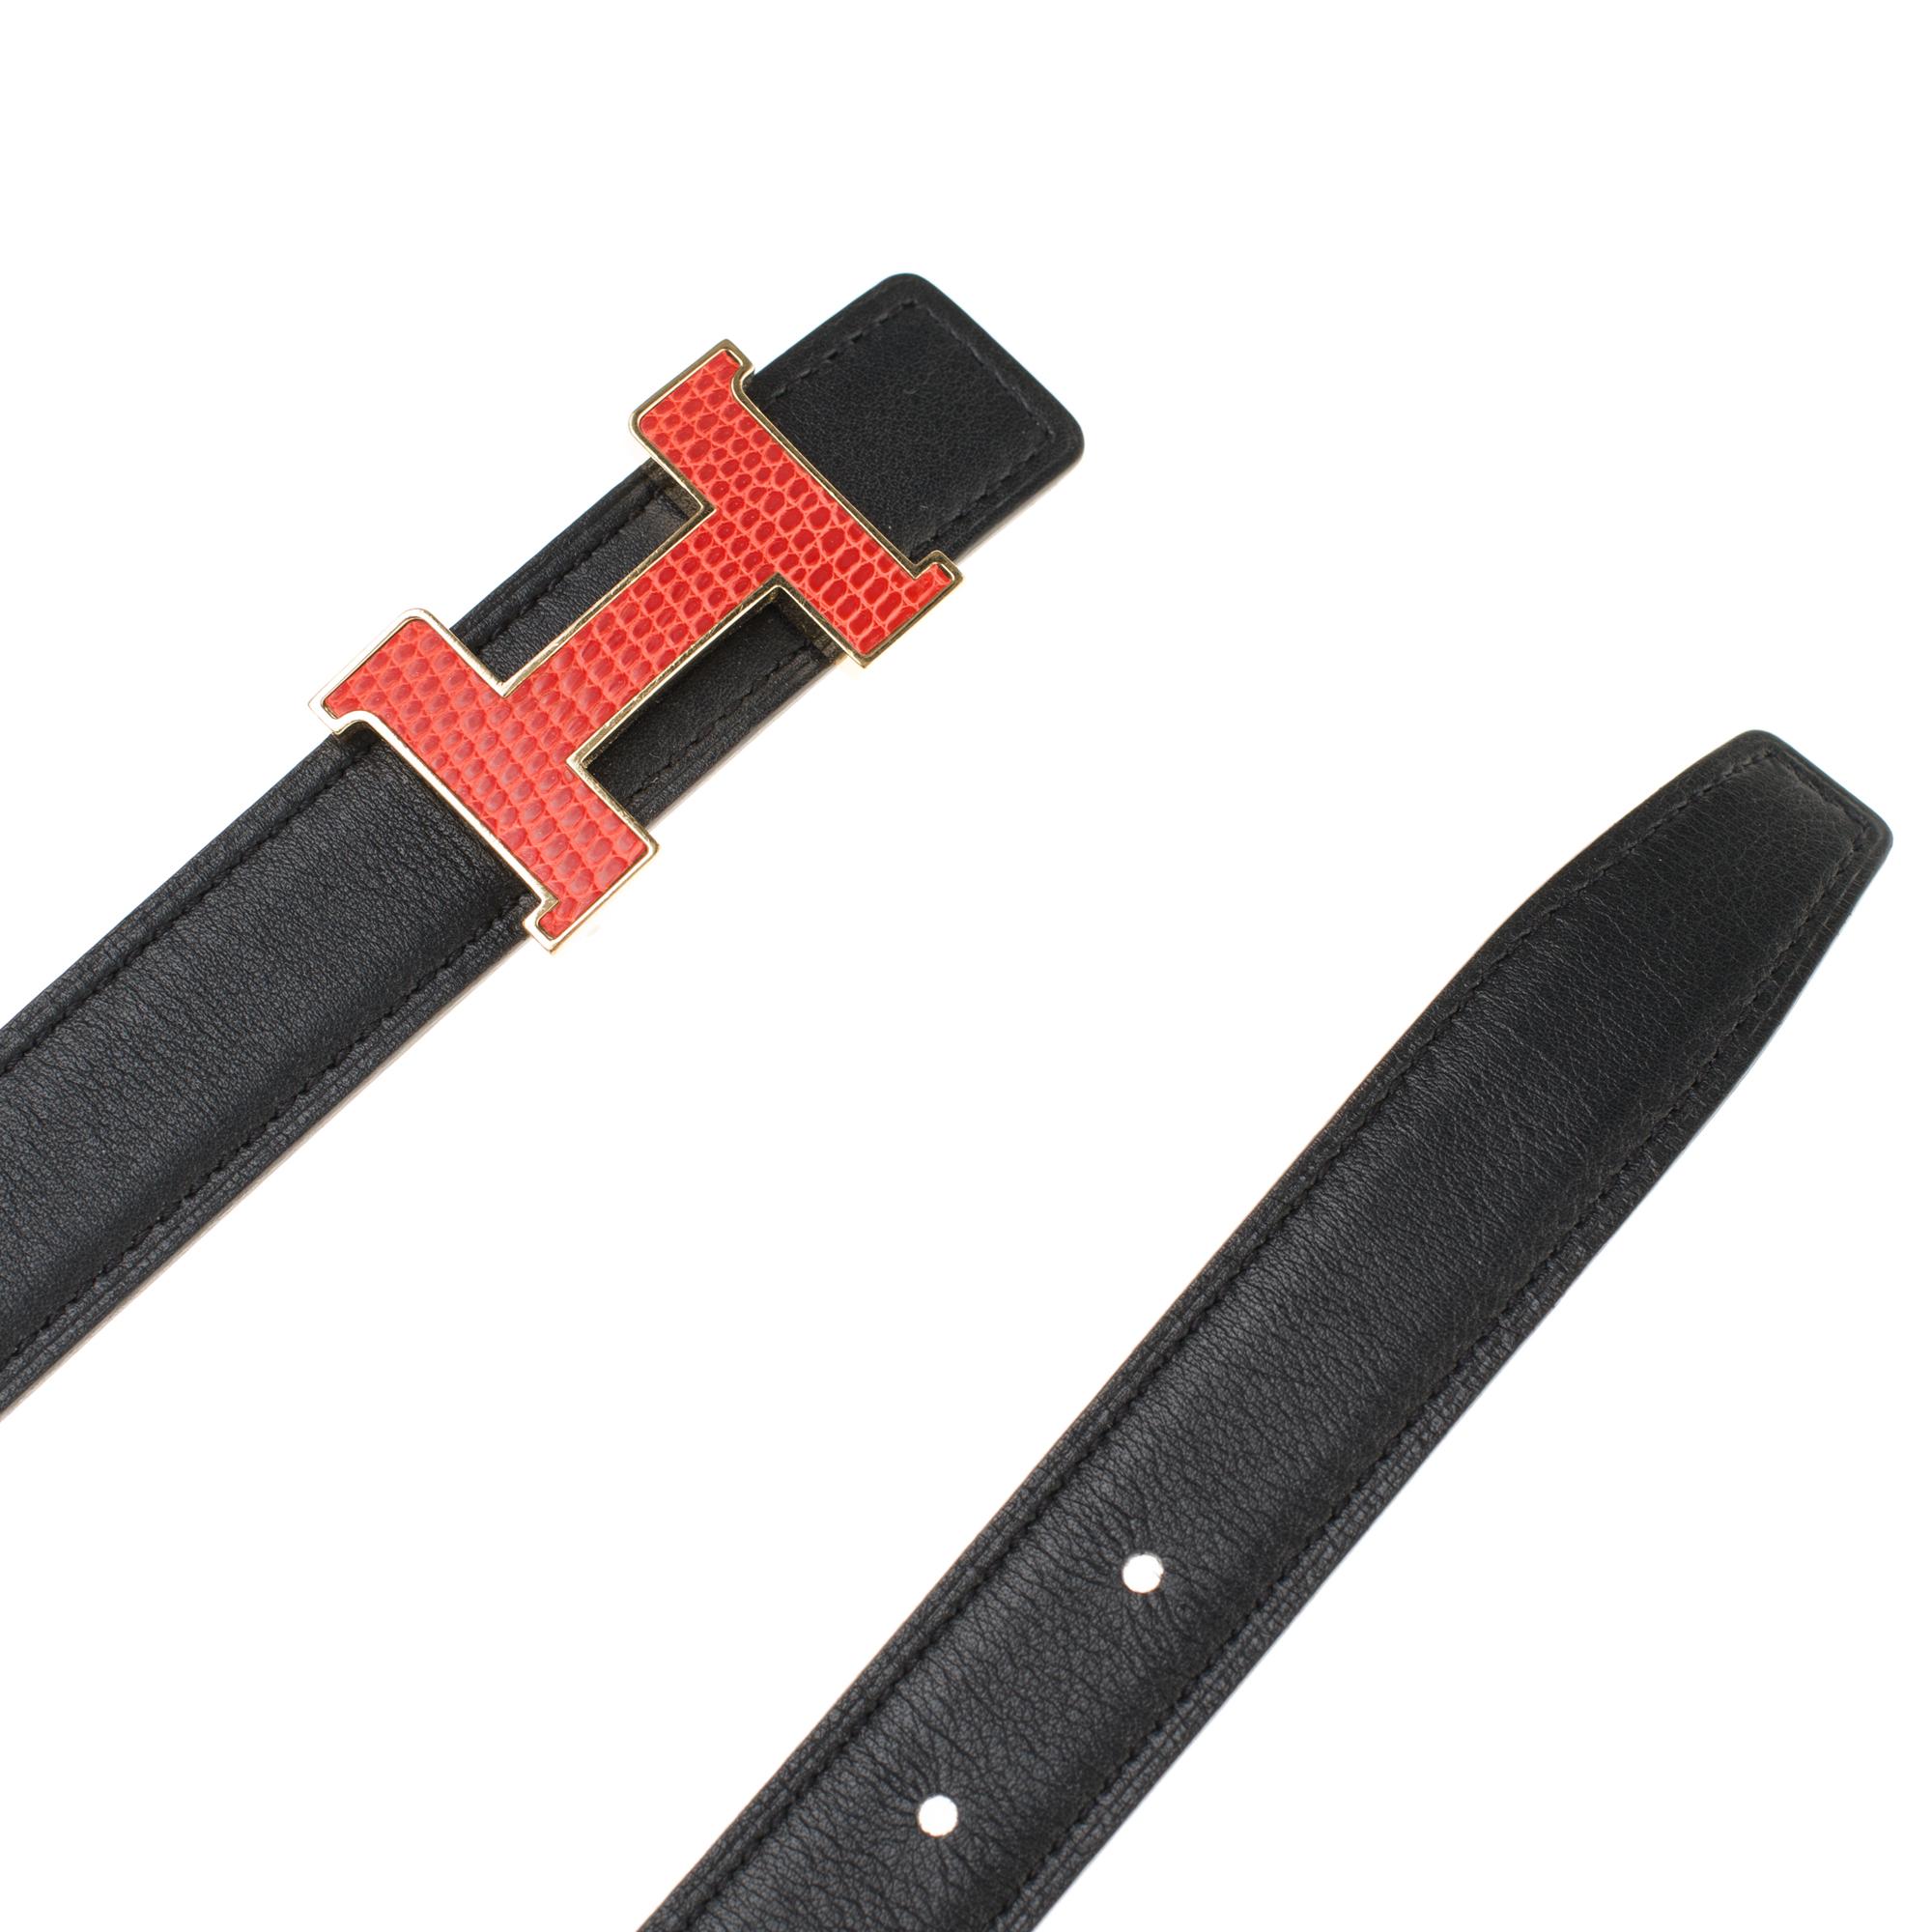 Amazing Hermès Reverse belt in black swift leather and étoupe epsom.
Gold plated metal buckle with red/orange lizard.
Signature: 